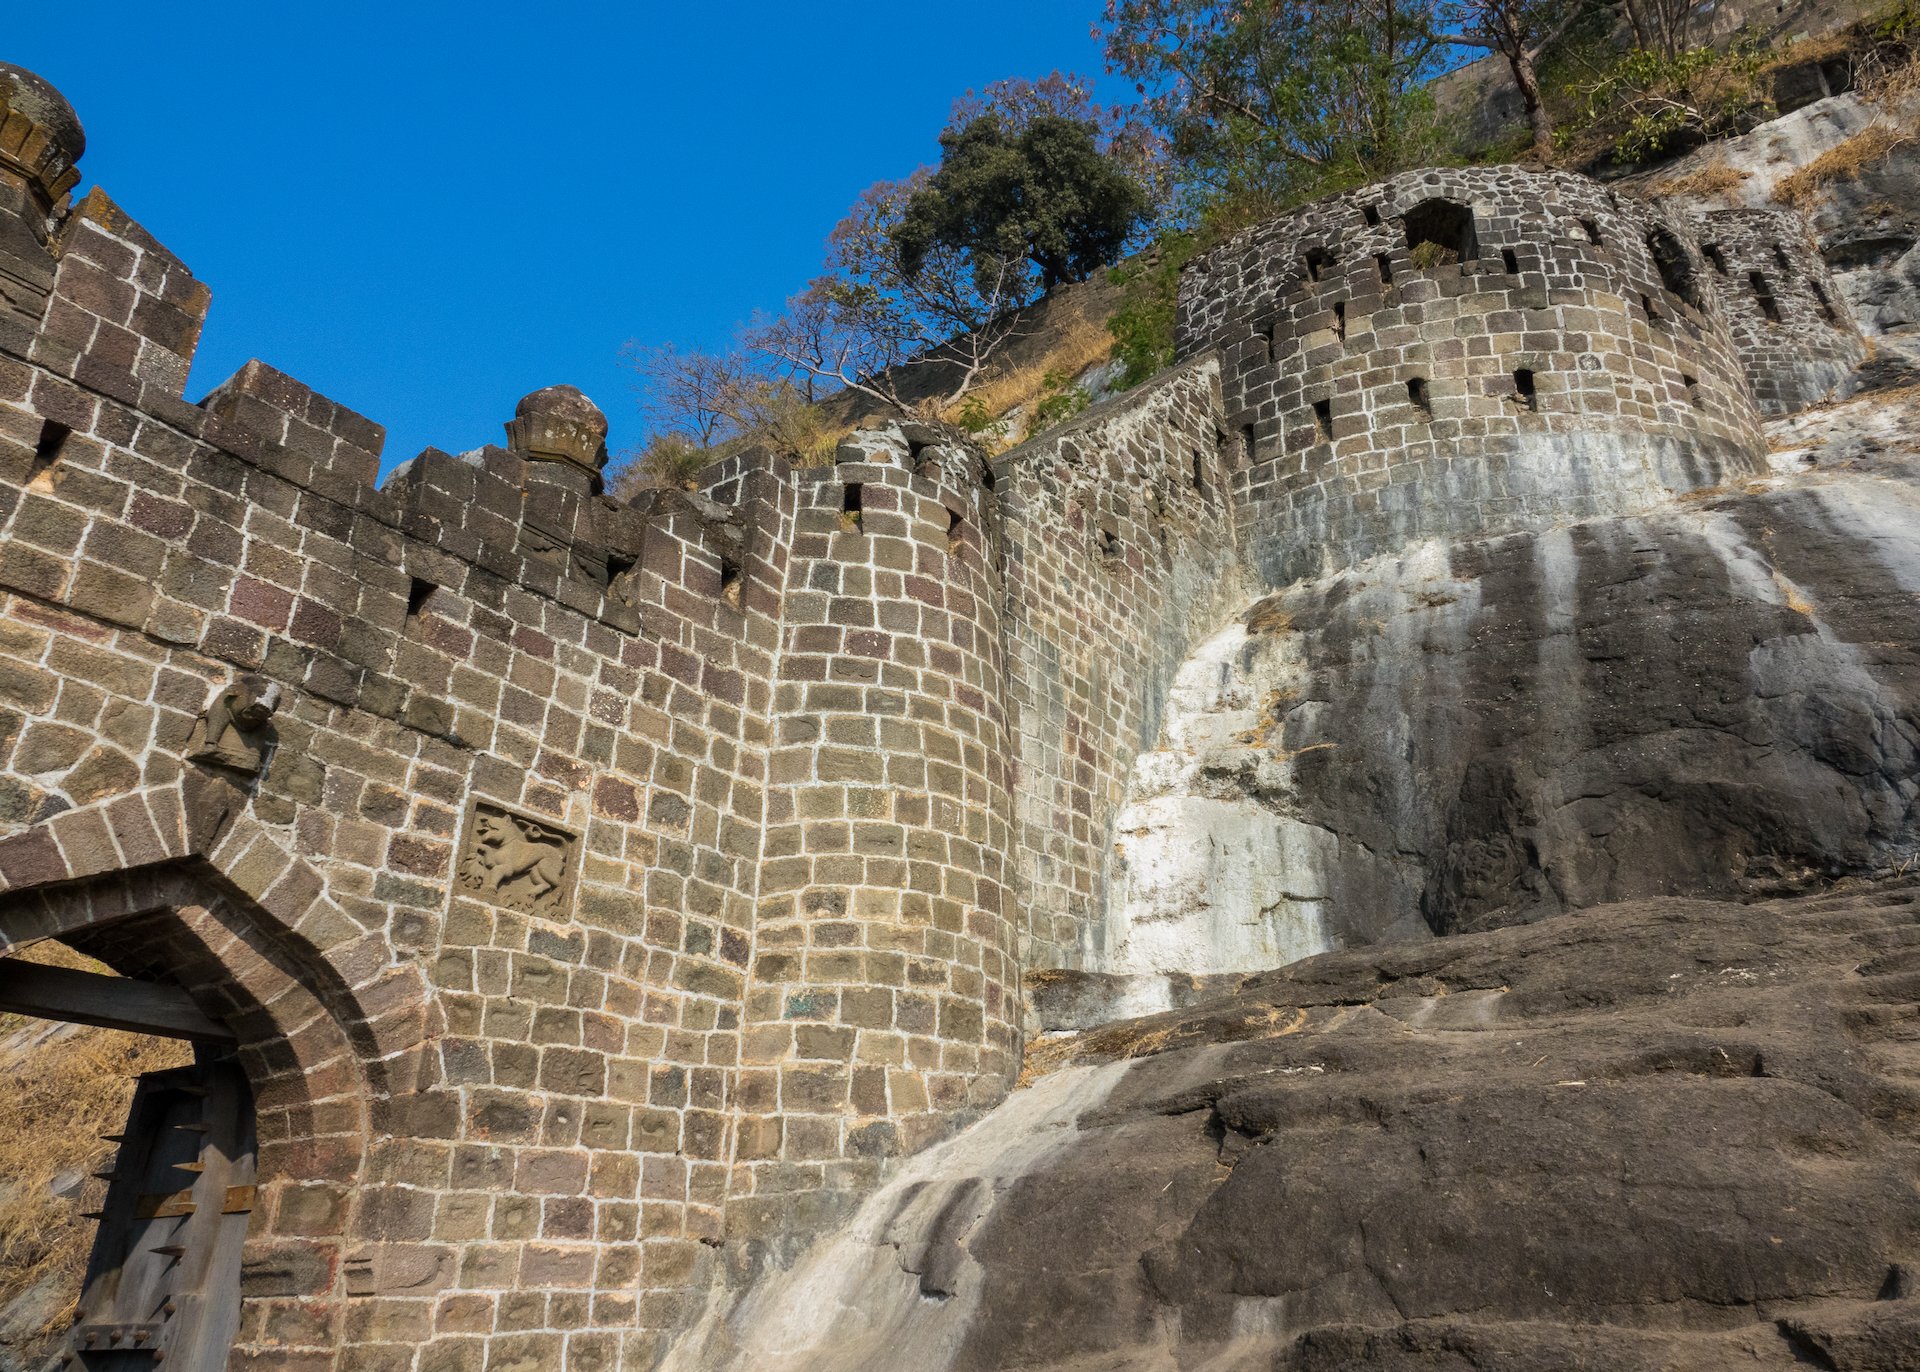  The fortifications were built right into the rock face.  